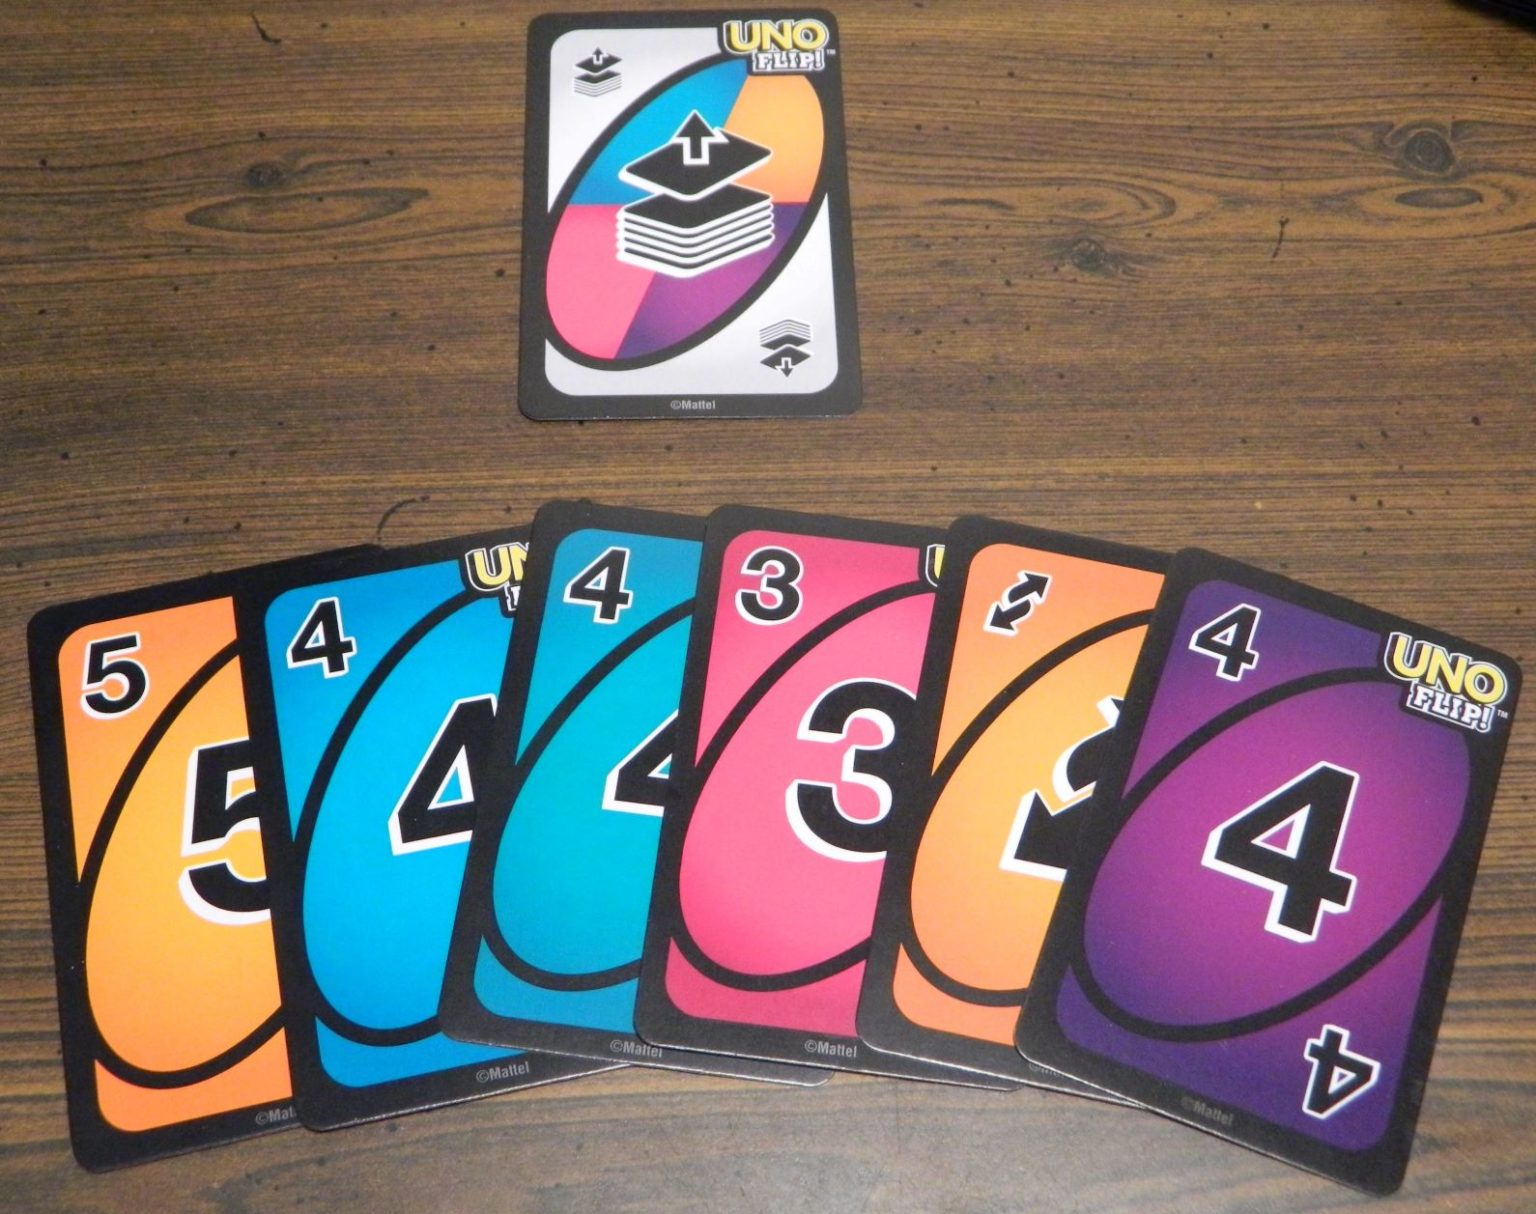 UNO Flip! (2019) Card Game Review and Rules Geeky Hobbies